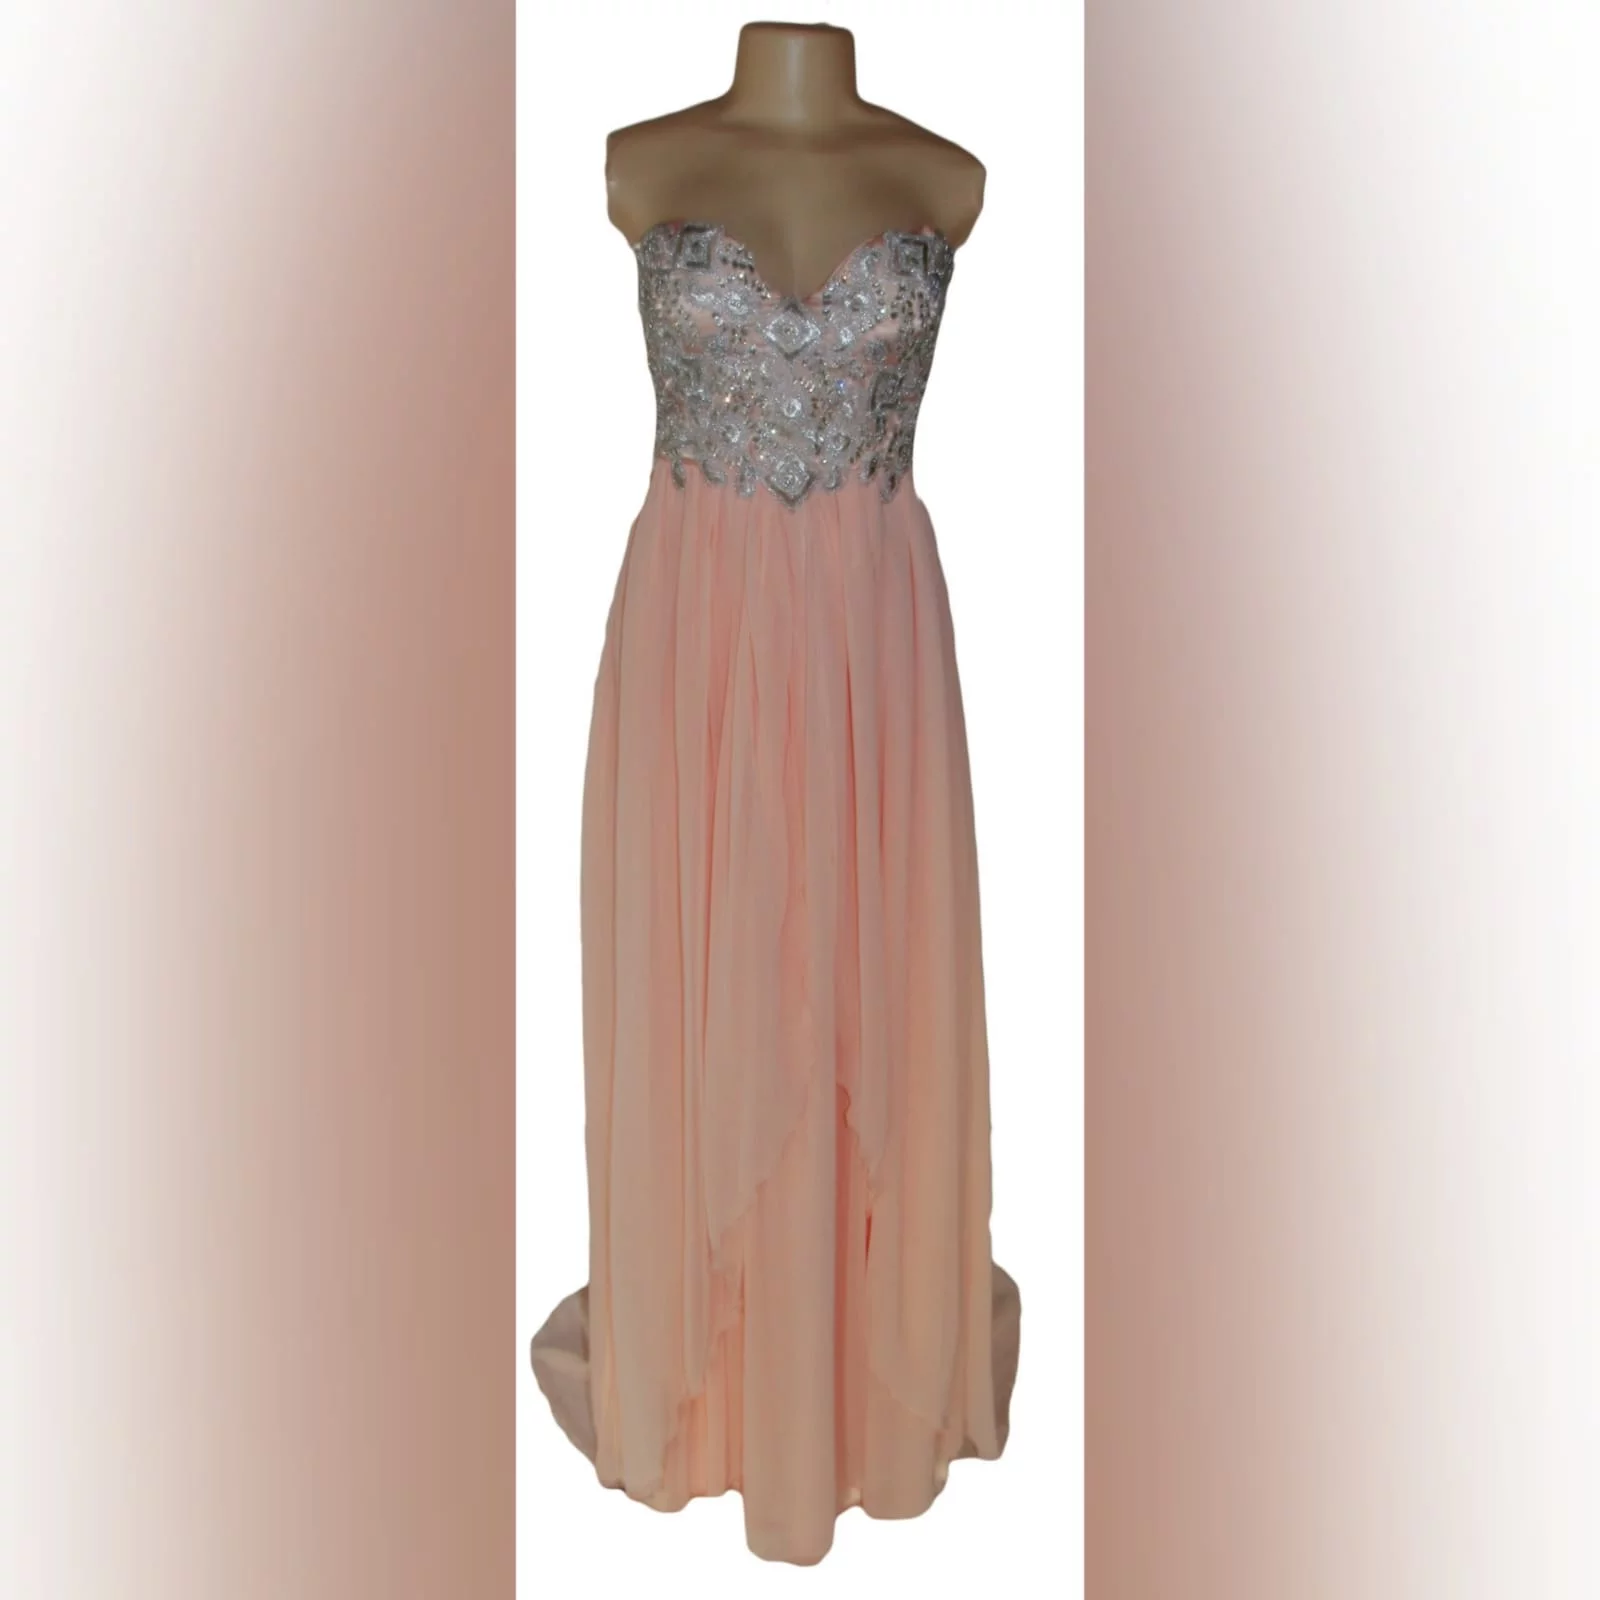 Peach and silver fun prom dress 4 peach and silver fun prom dress. Bodice detailed with appliques and beads, with a lace-up back. Bottom with gathered chiffon and an overlayer opened in front.